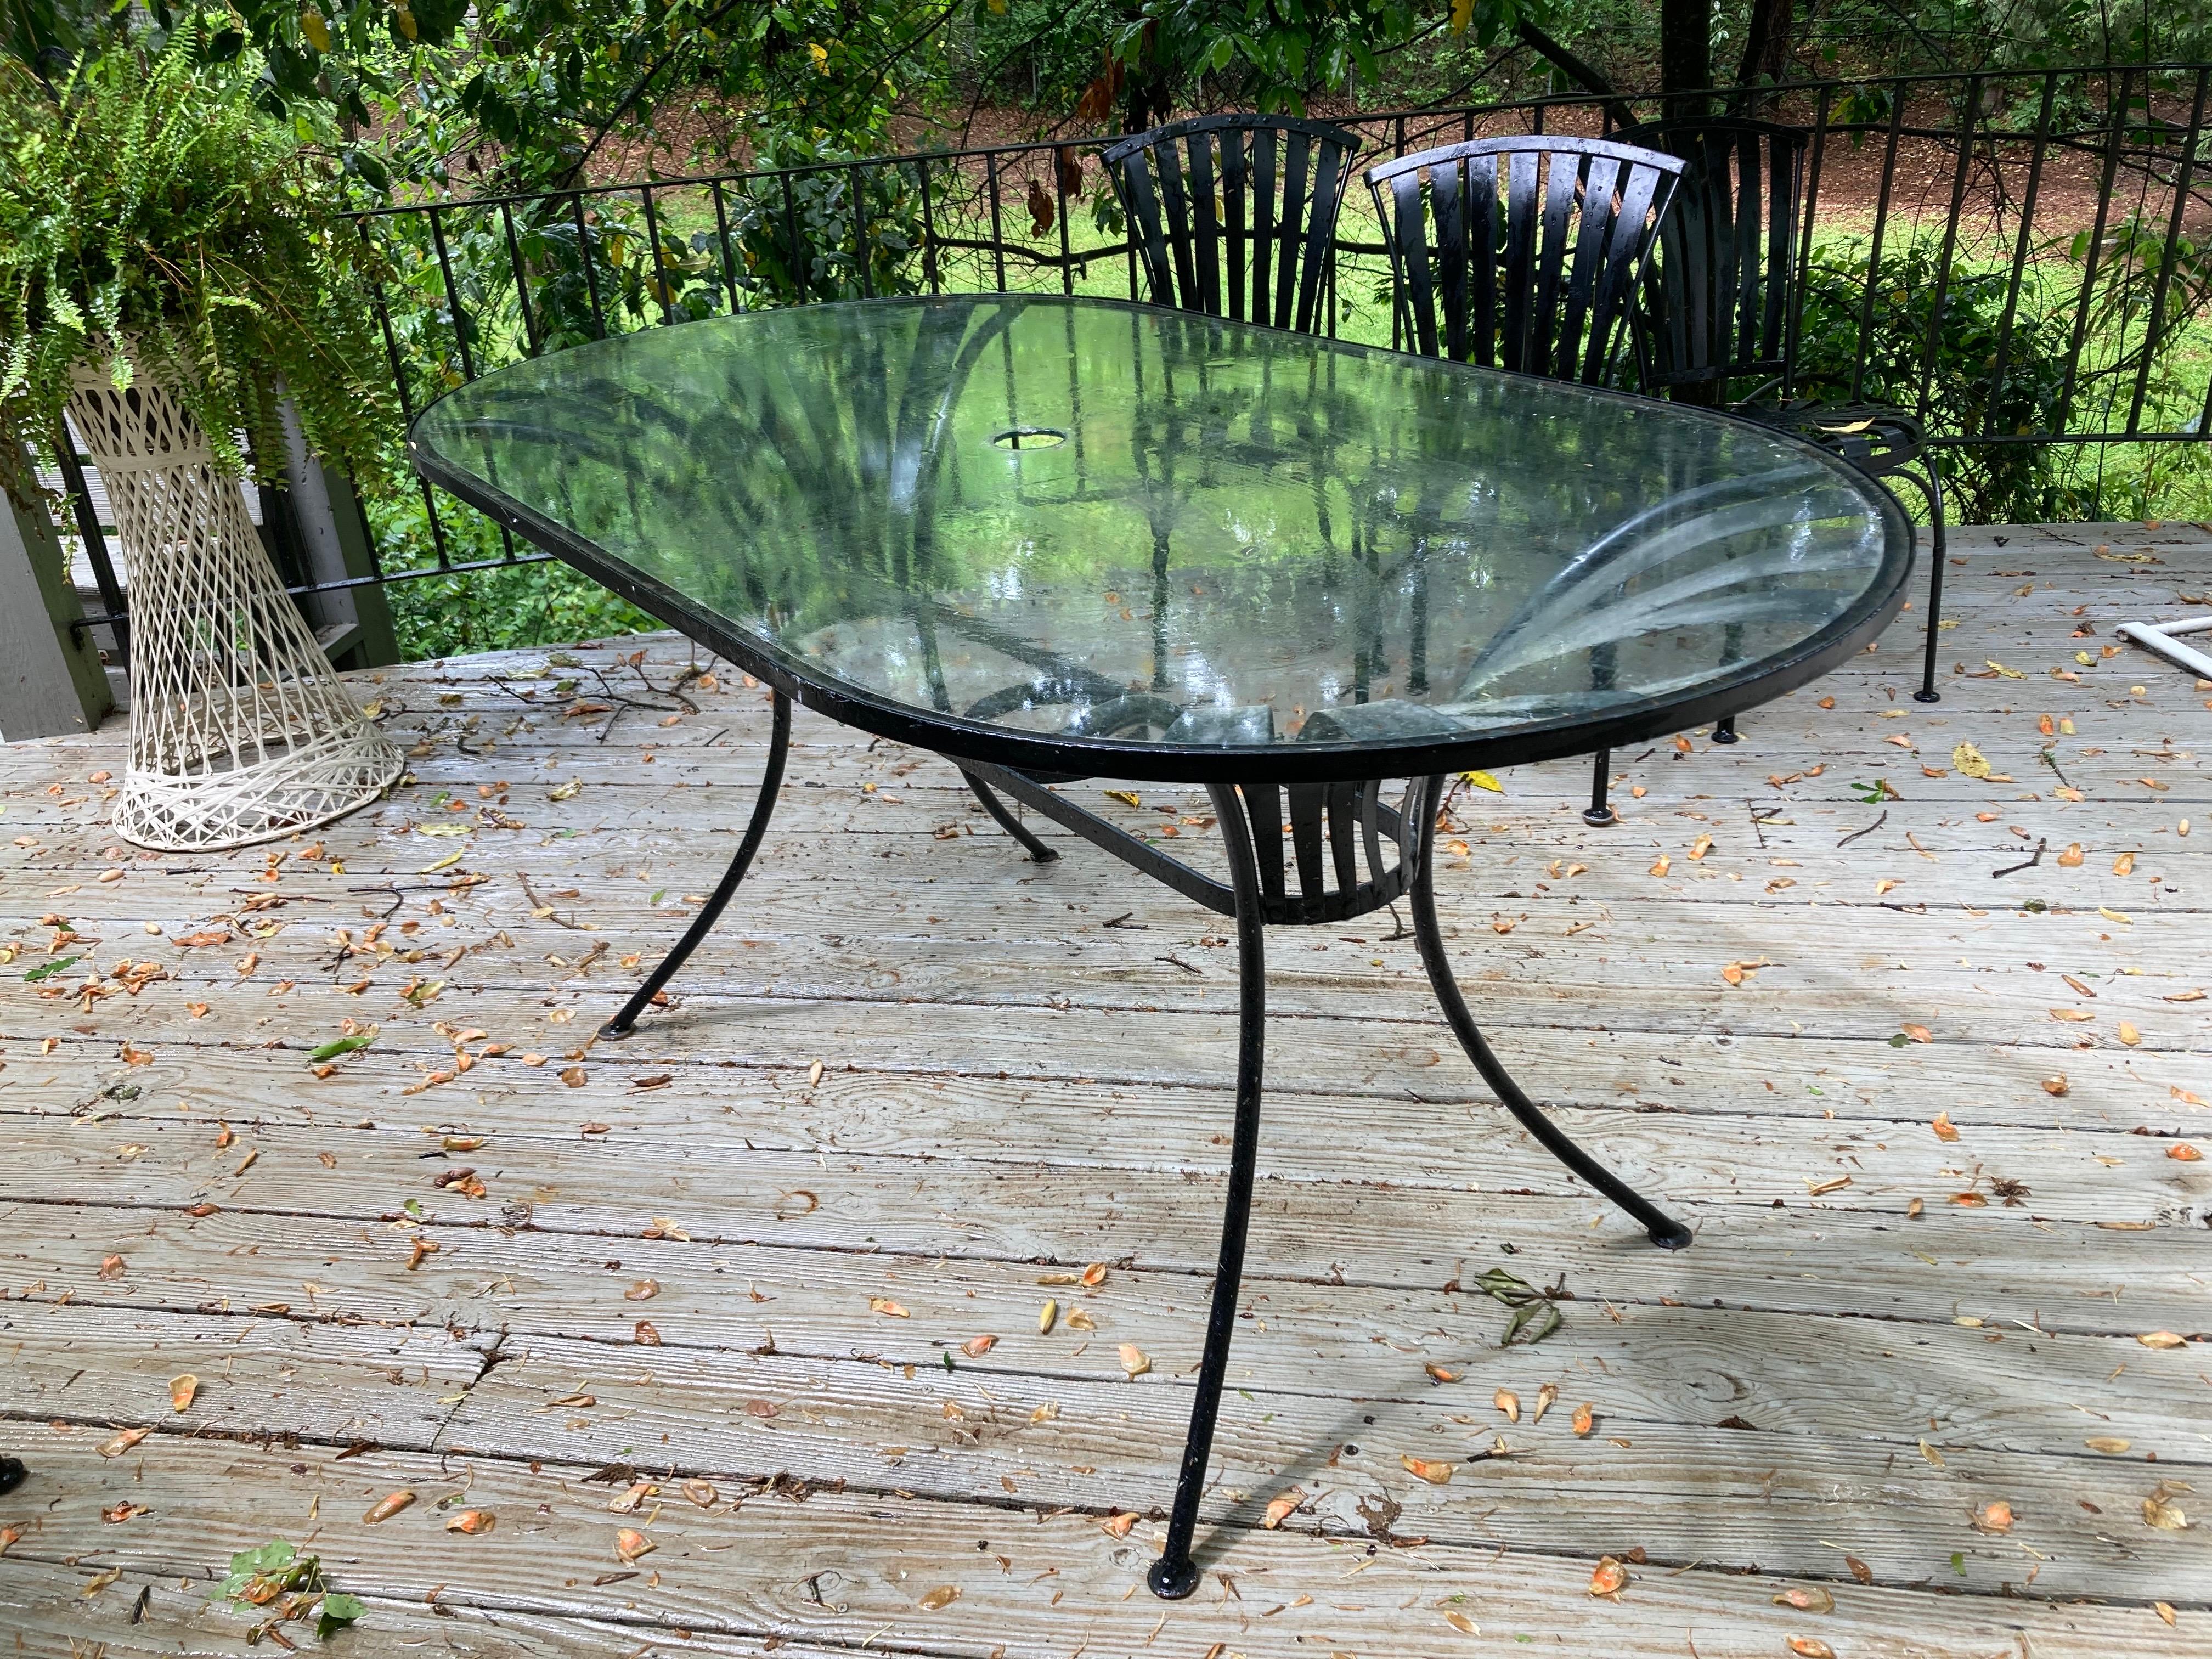 in near mint condition, lived most of their lives in a carolina coastal home on a screened in porch.

table is 60 wide, 33.5 deep and 30 tall

glass has umbrella hole, client can purchase protective ring at any patio store based on the size of your